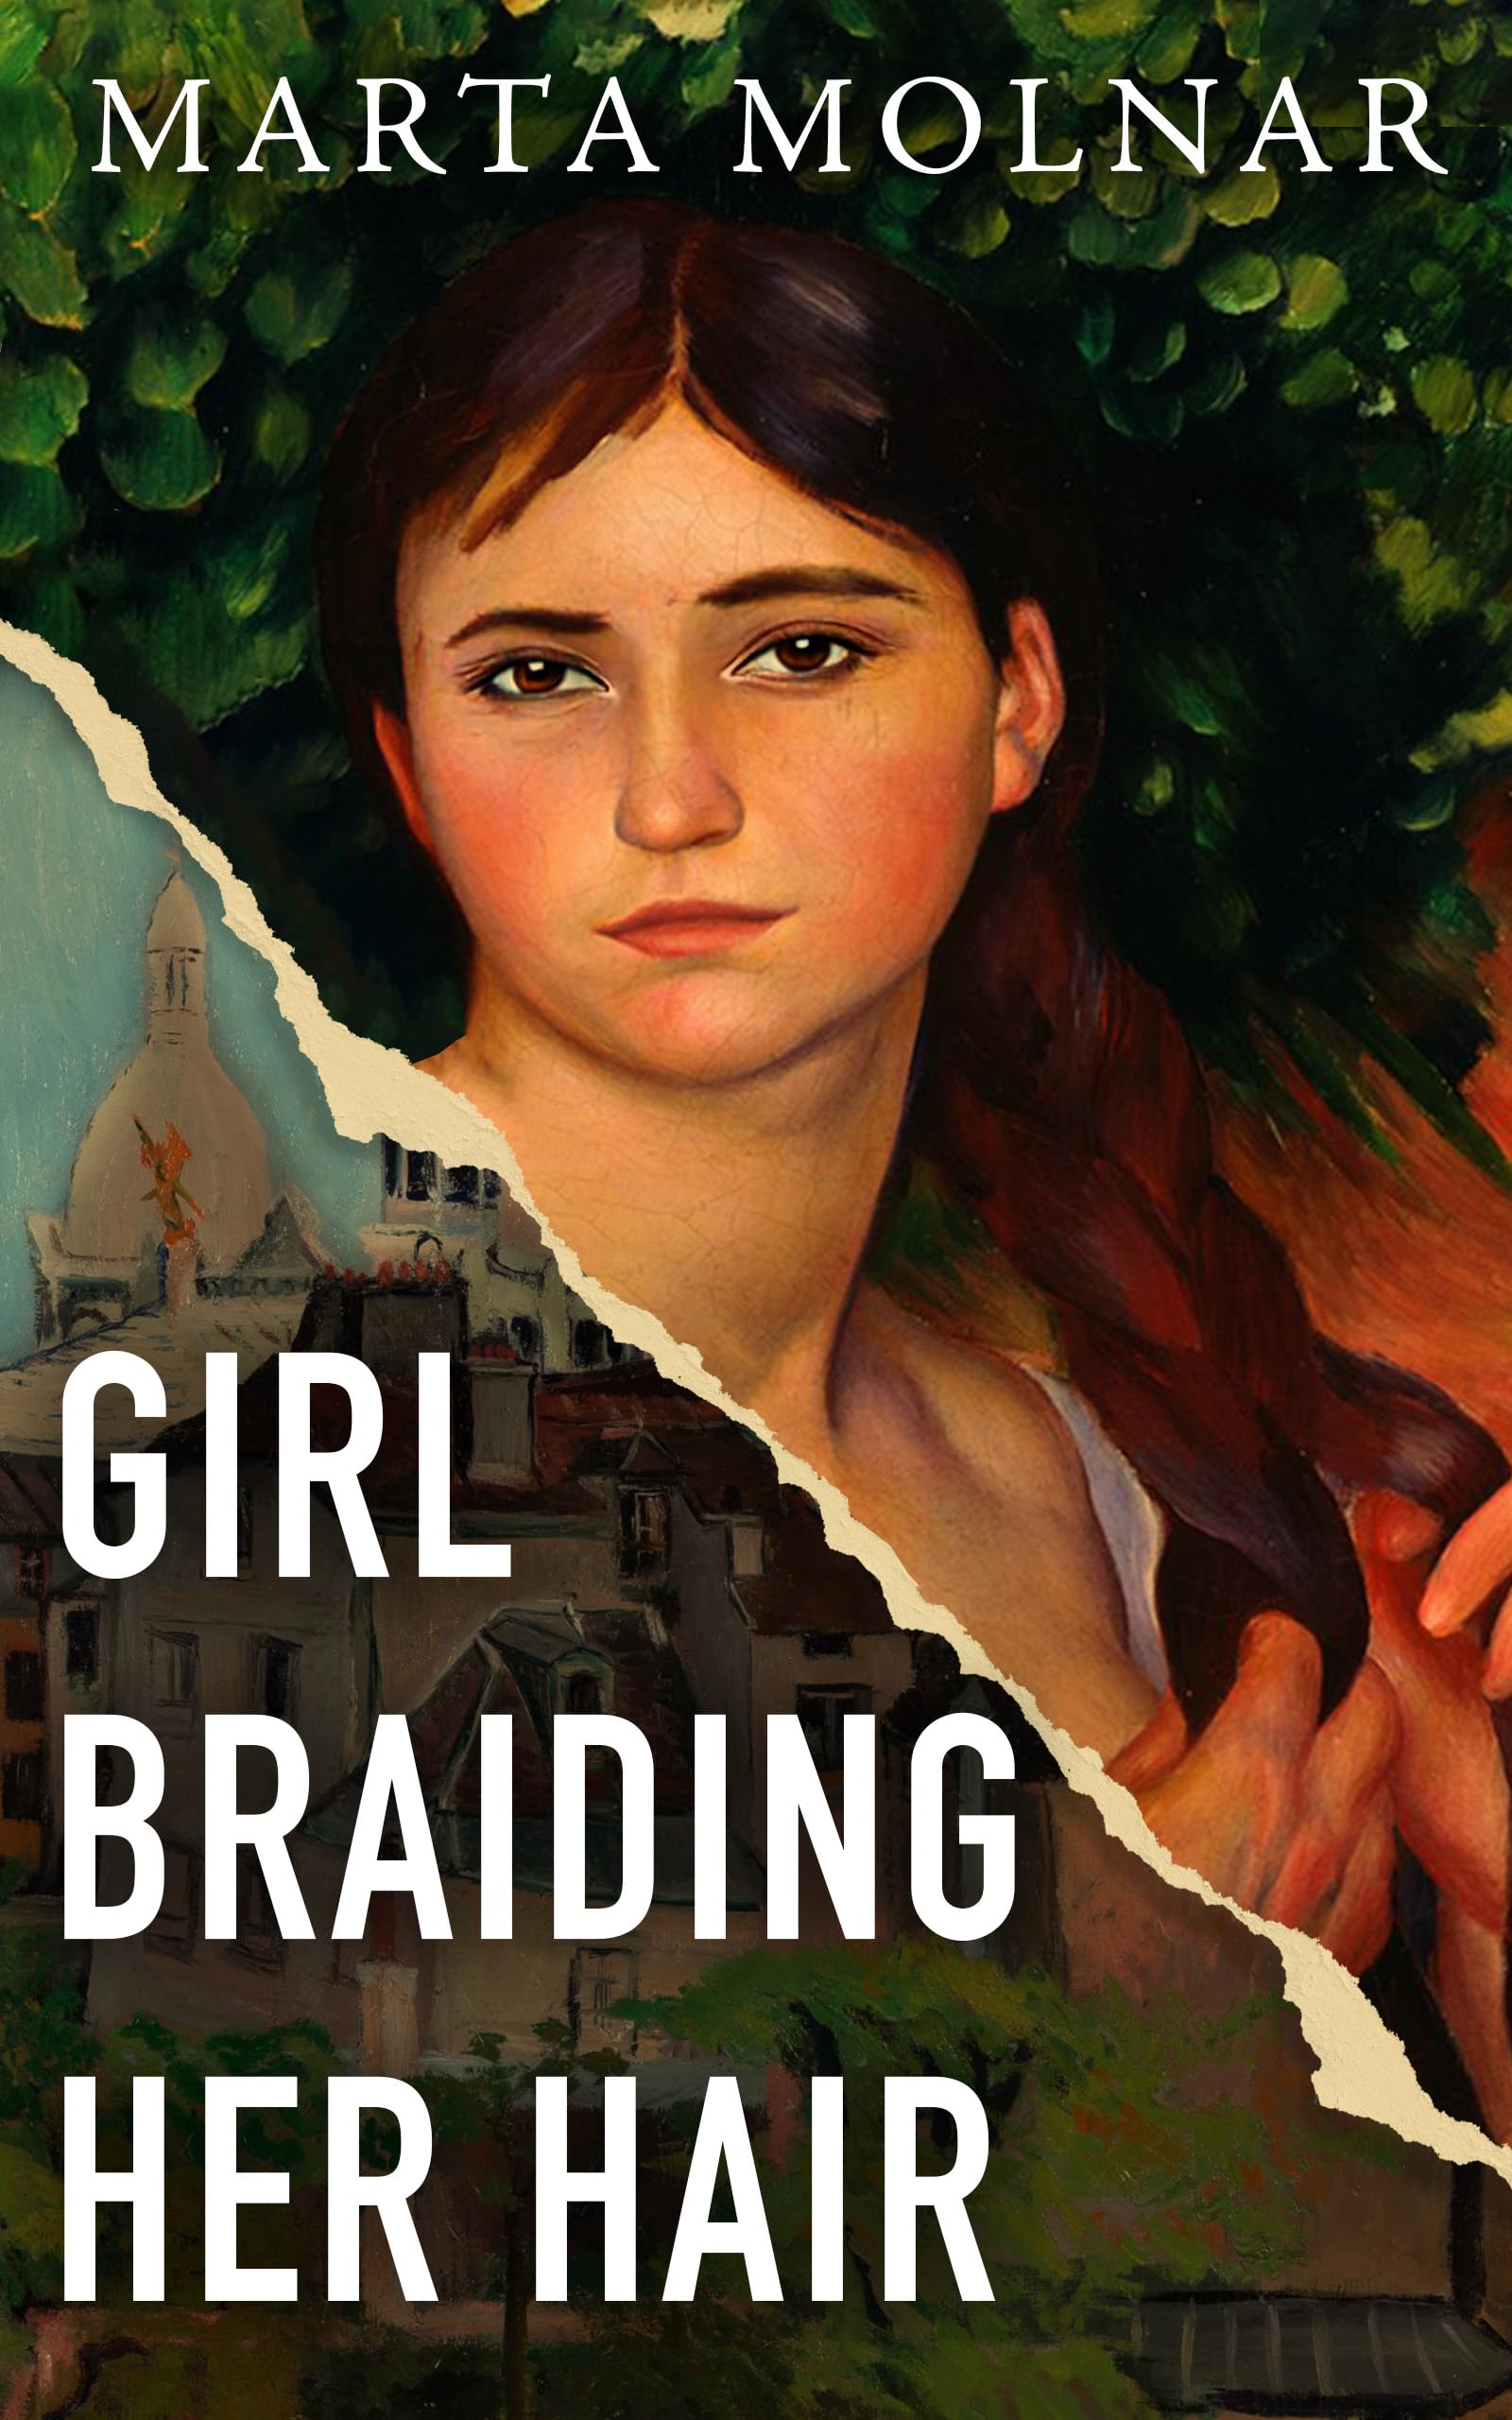 Girl Braiding Her Hair: Inspired by the true story of a revolutionary artist history forgot--Suzanne Valadon, who painted with the Impressionists in Paris and fought her way to recognition.